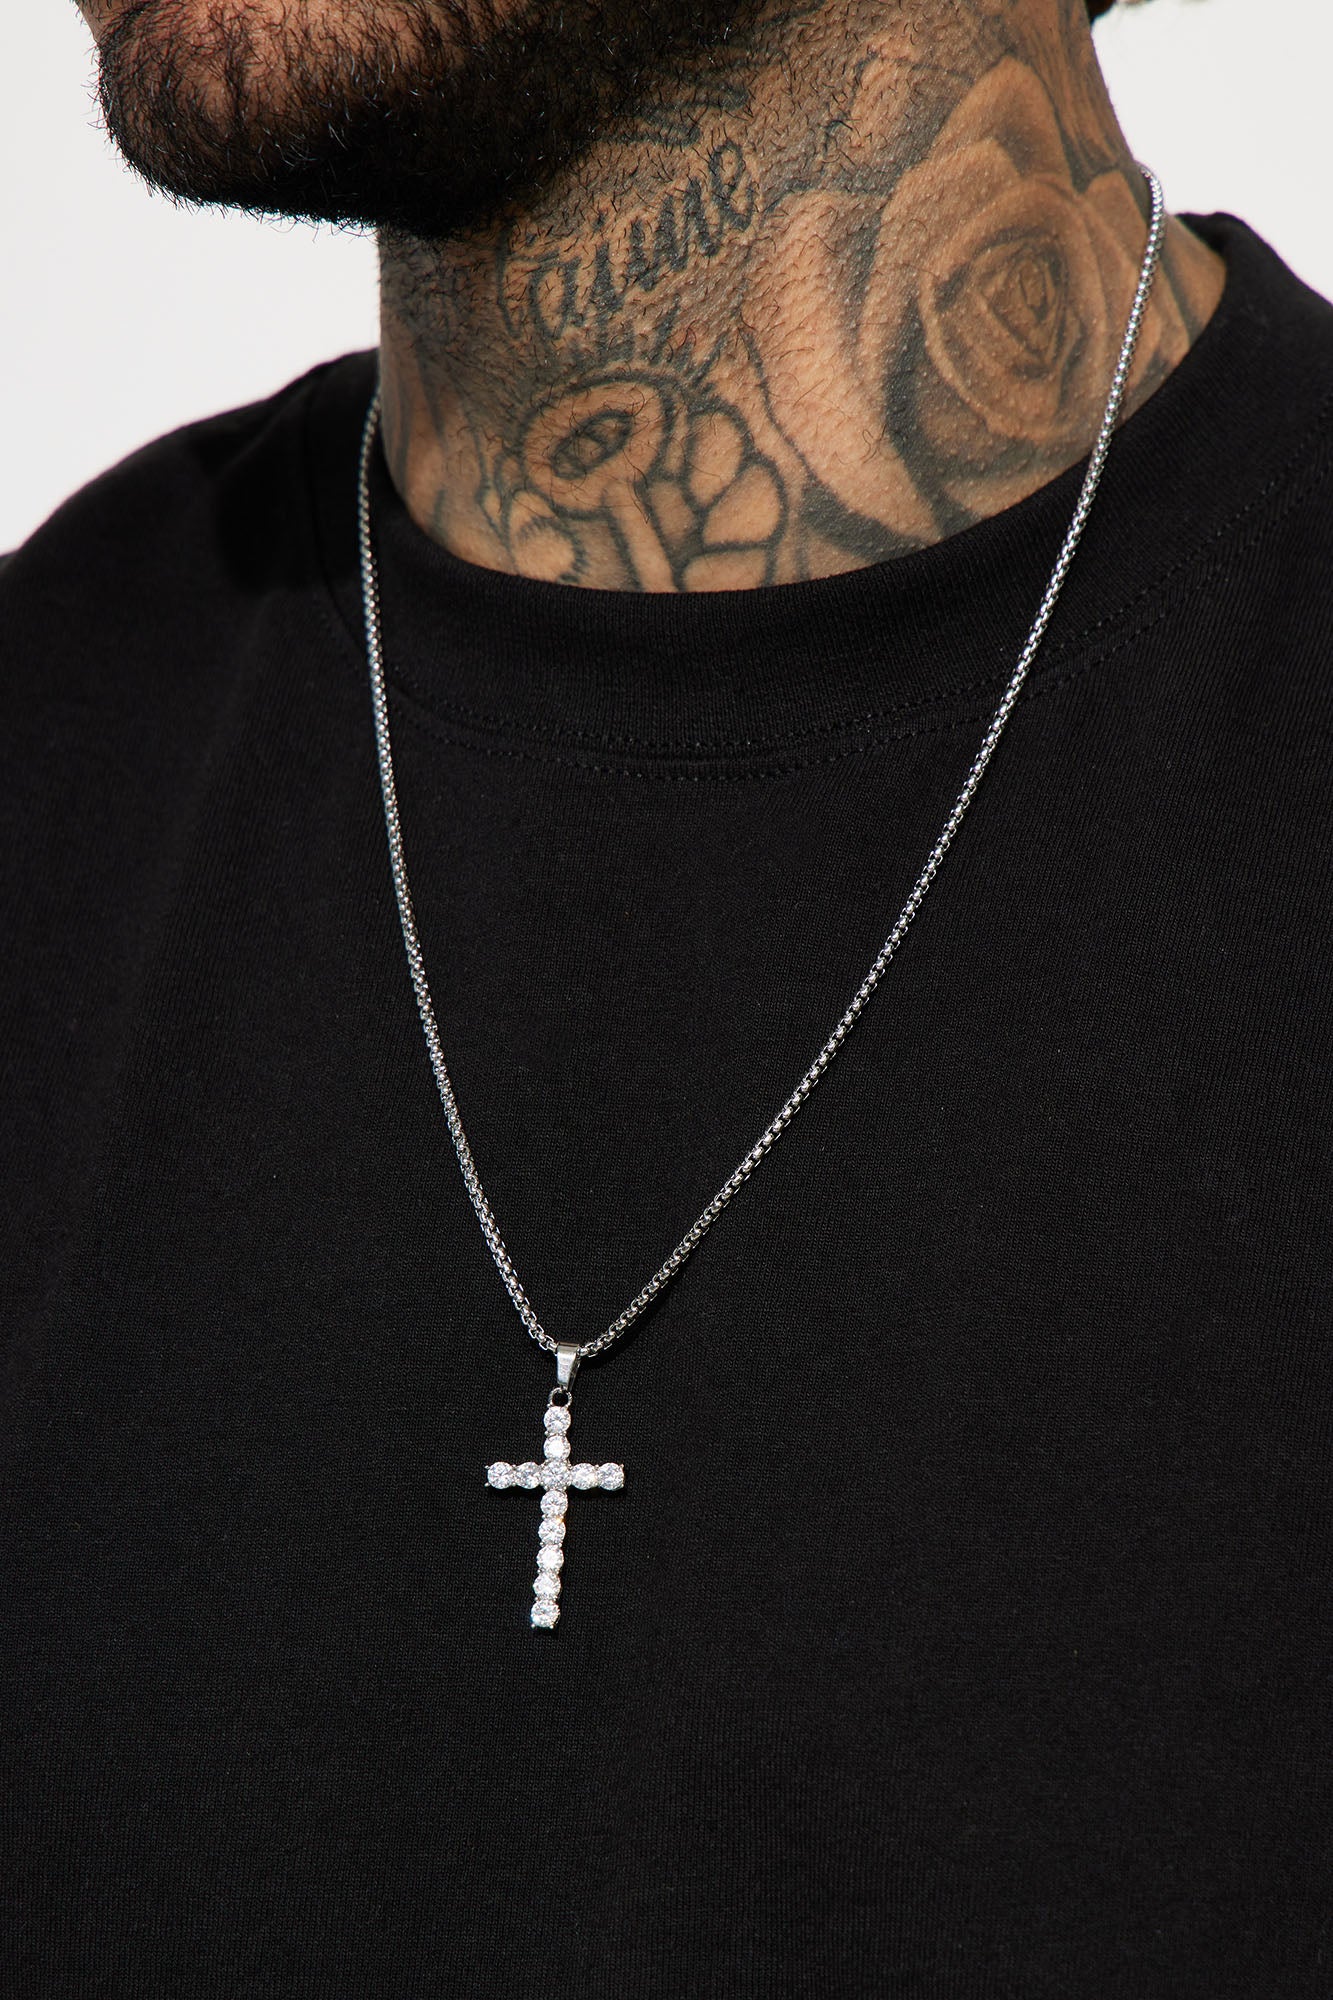 Mens Silver Cross Necklace, Mens Cross Pendant, Proclamation Jewelry